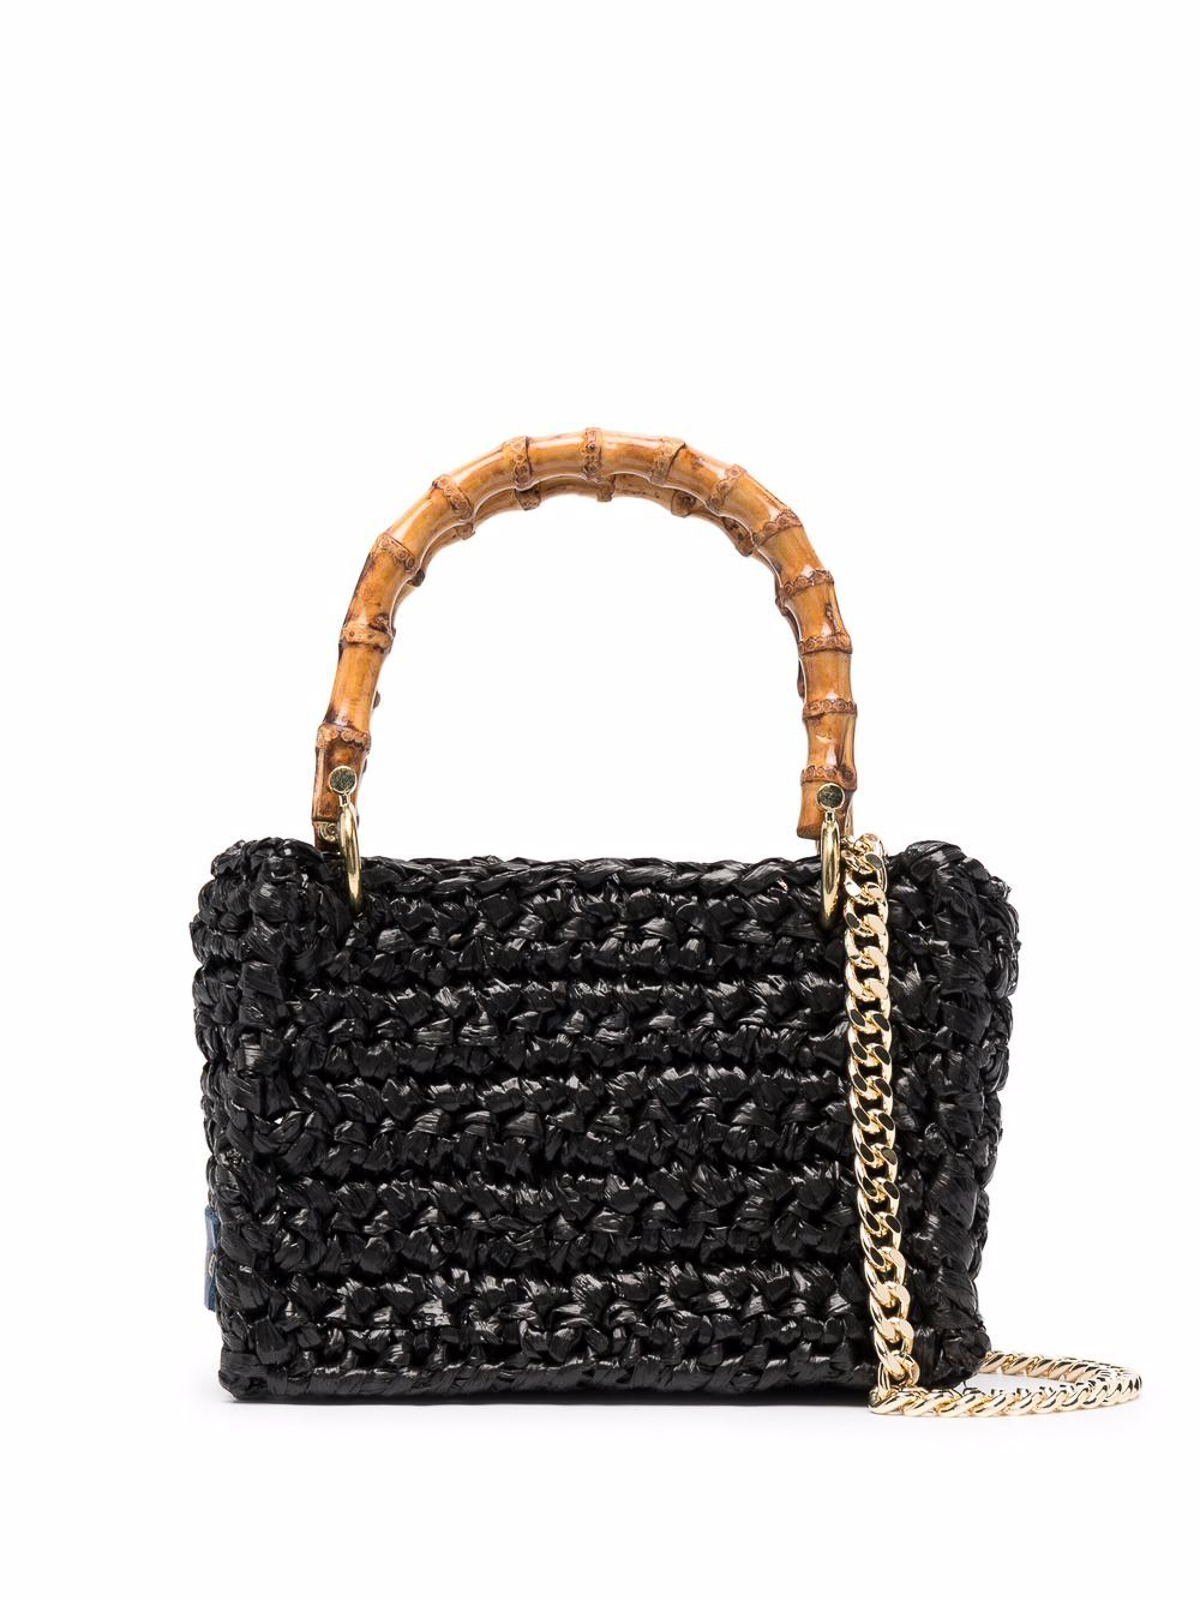 Shop Chica Bolso Shopping - Negro In Black